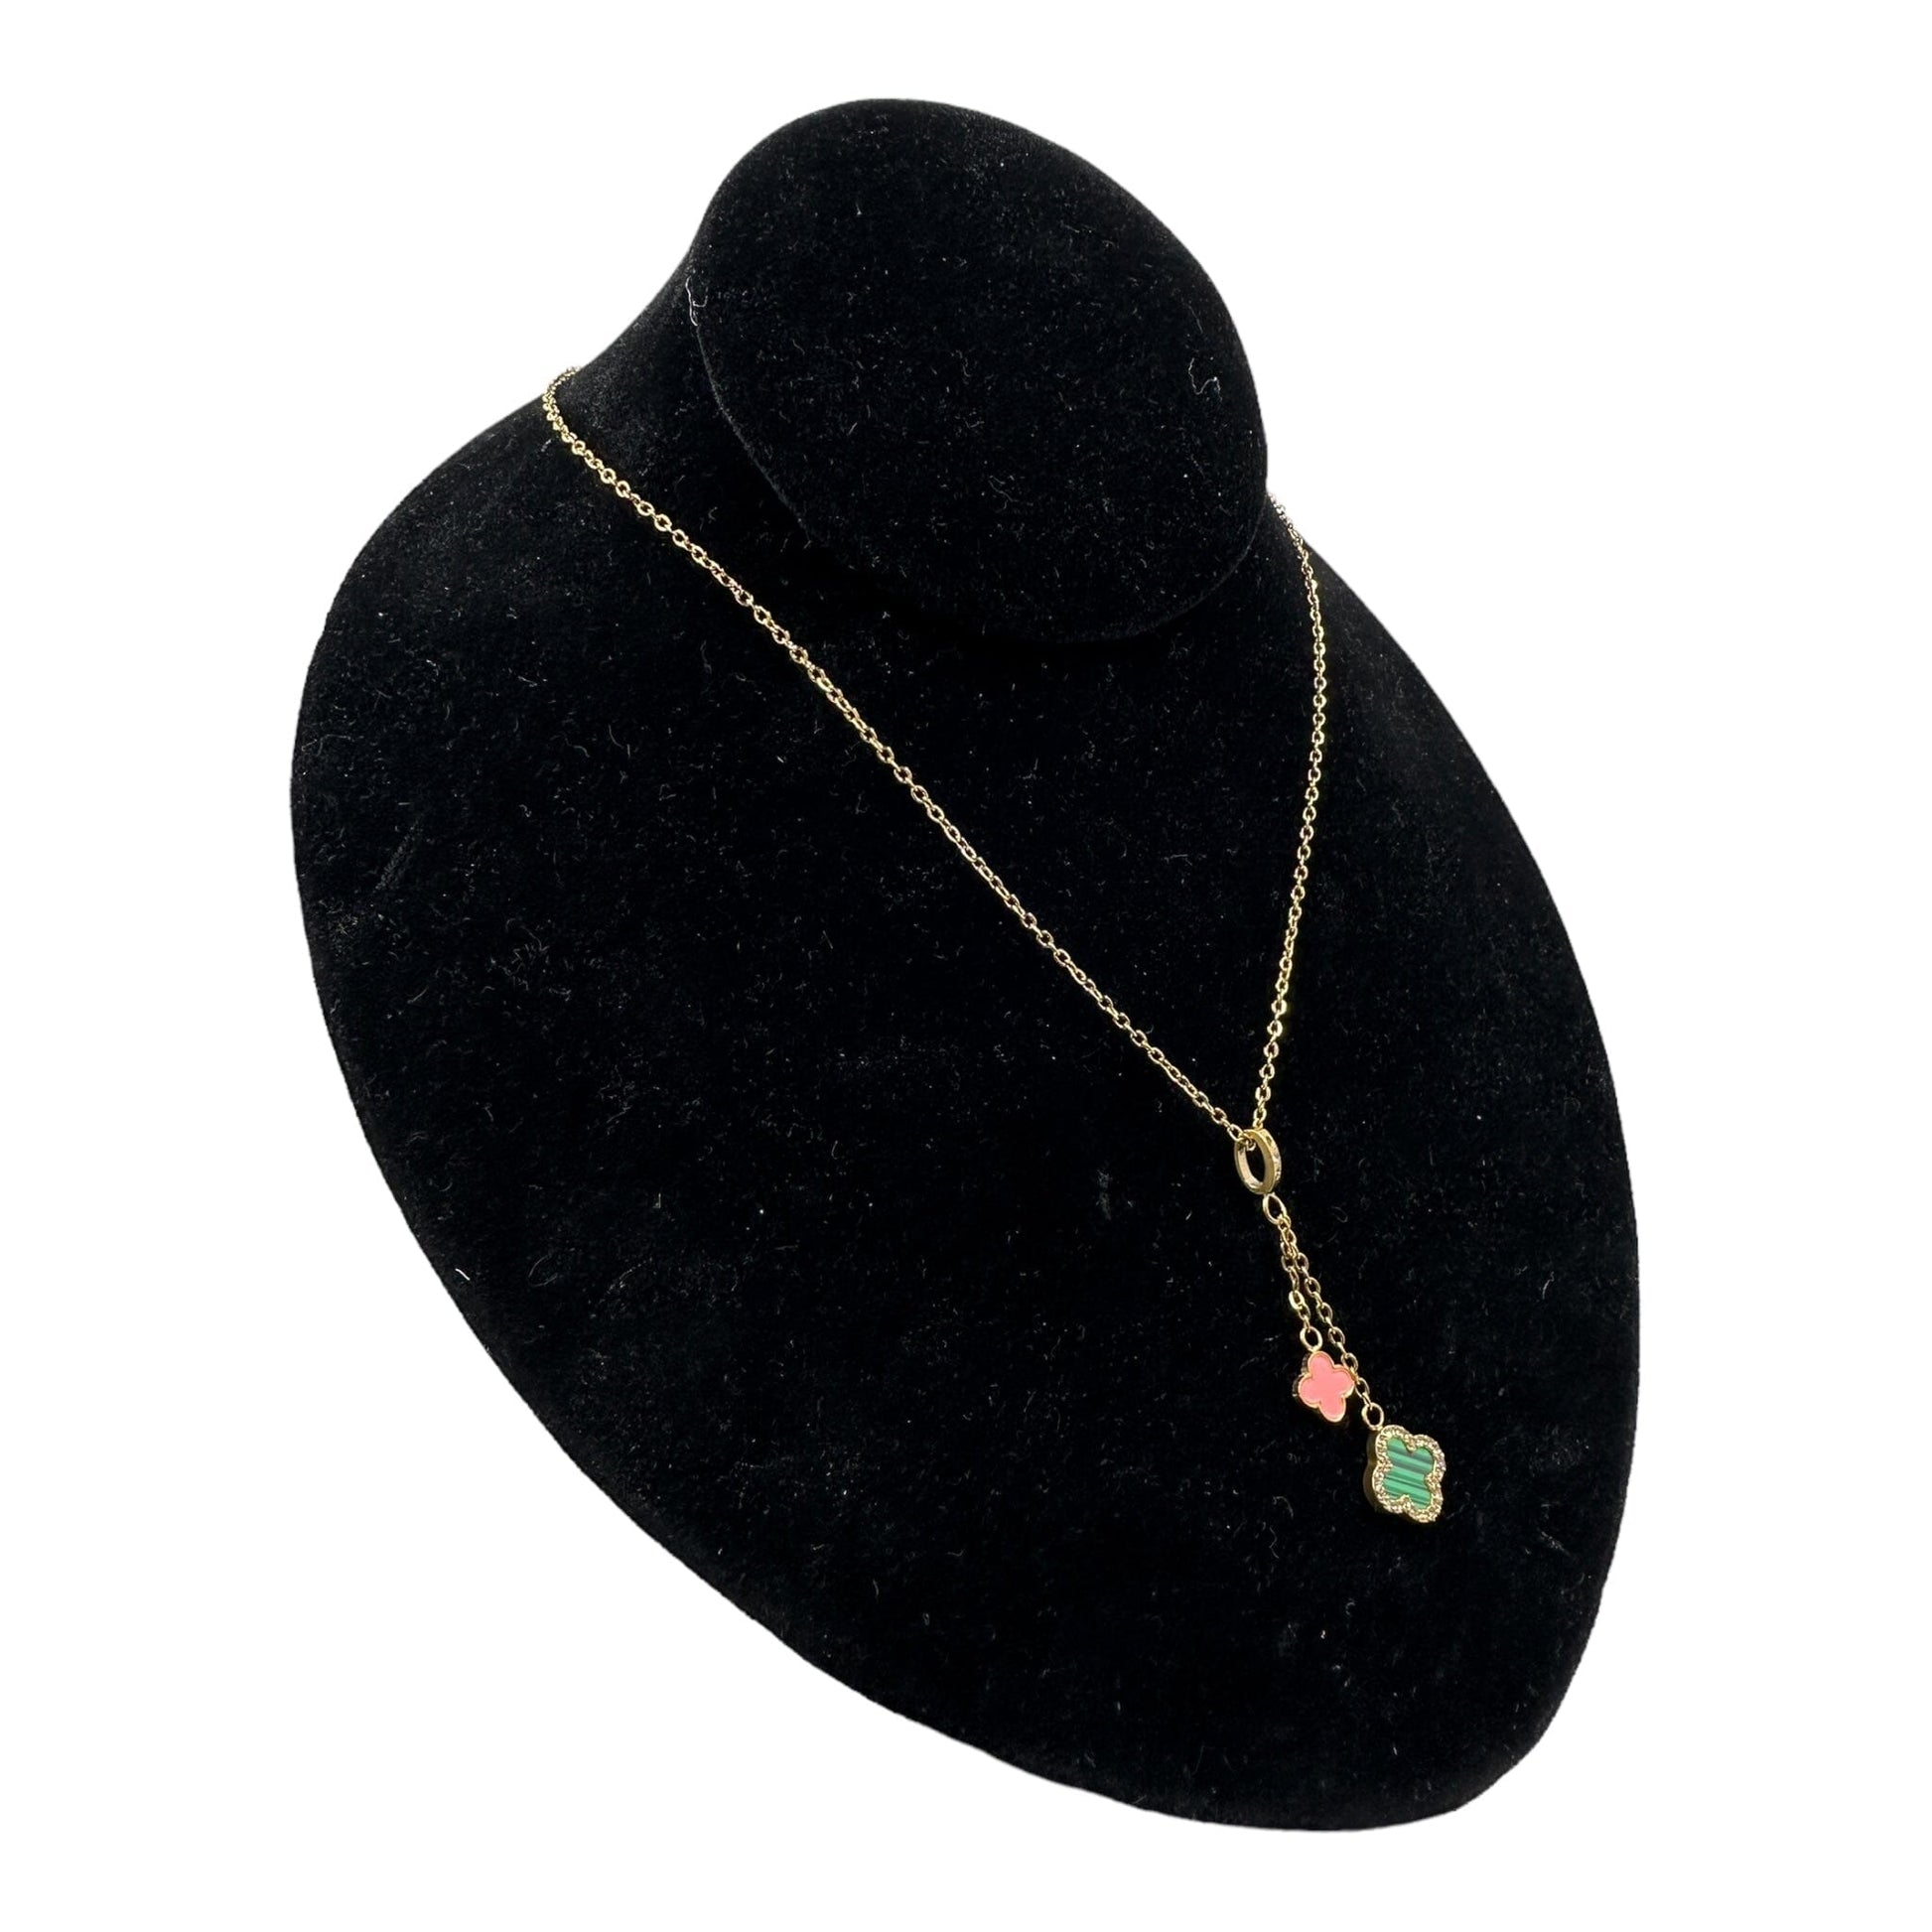 Kaitlin Double Drop Pink and Green Gold Necklace displayed on a black velvet jewelry stand, featuring green malachite and pink stones on a stainless steel chain plated in 18k gold.